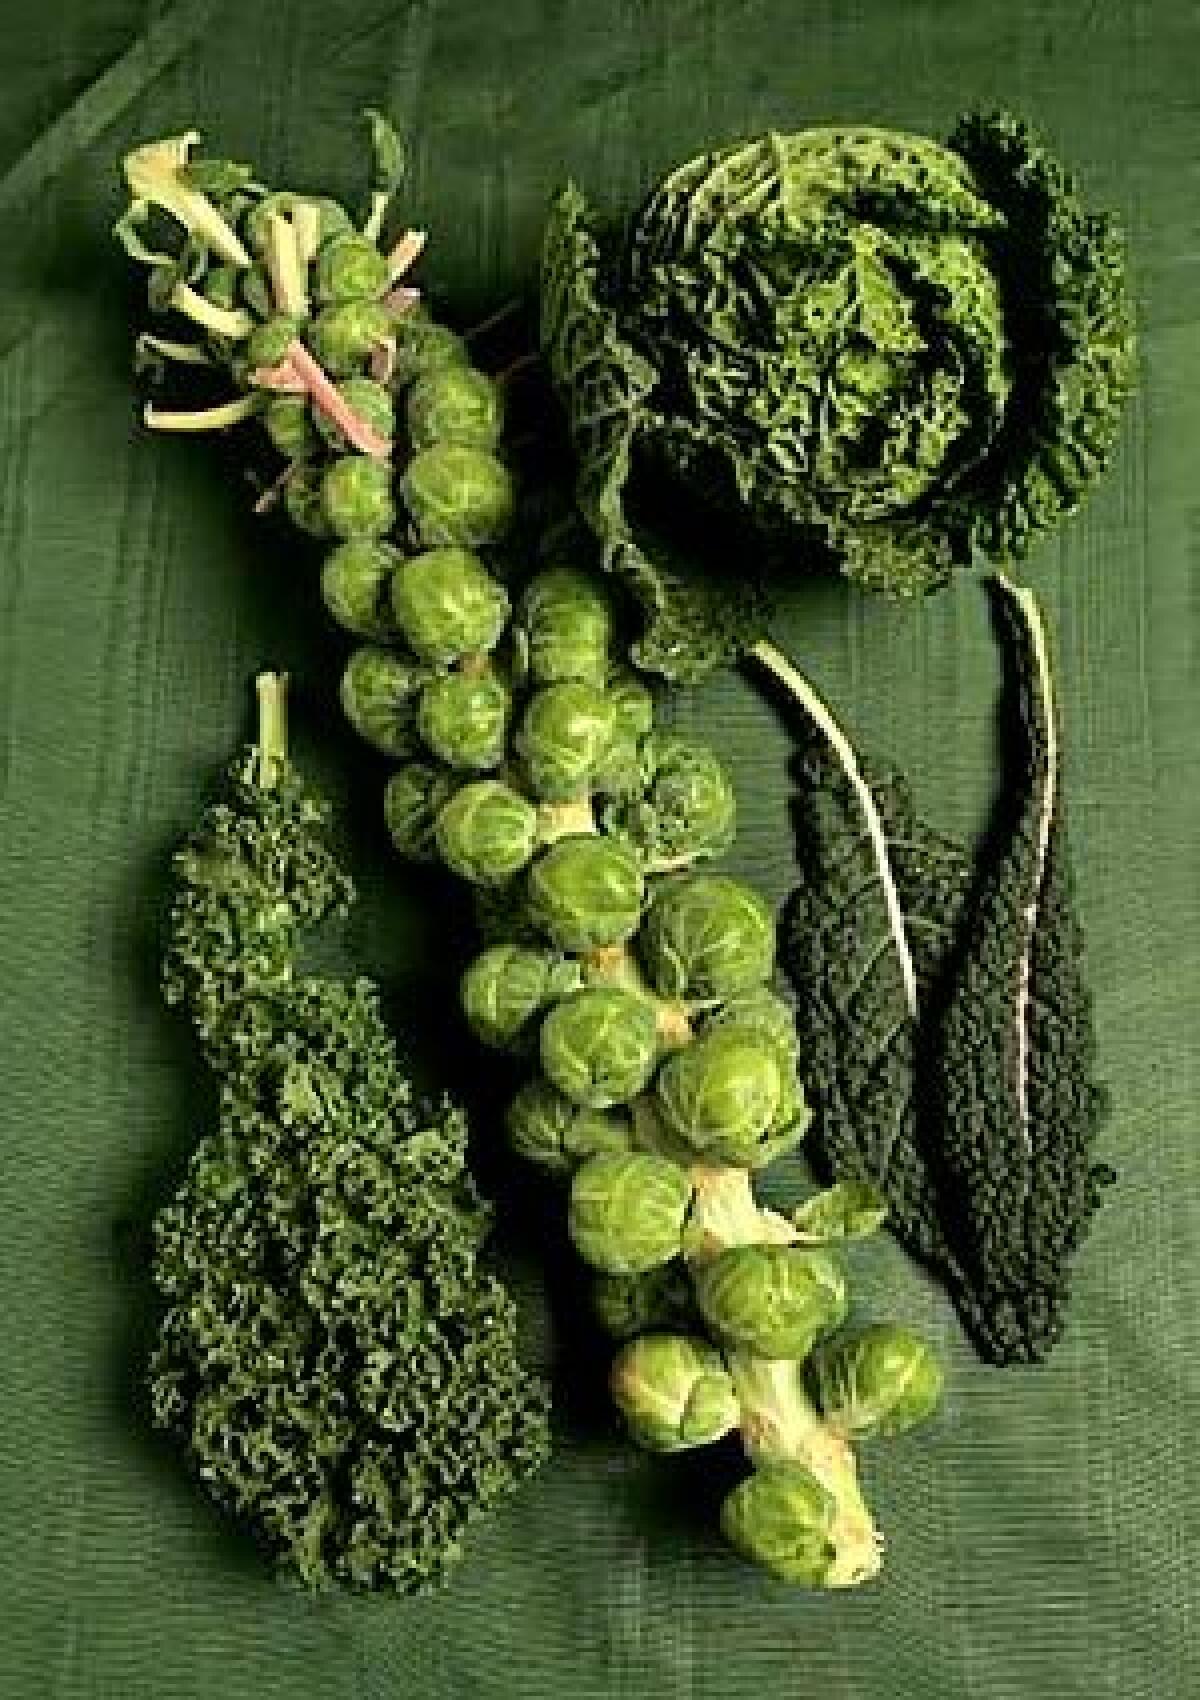 From left, curly kale, a stalk of Brussels sprouts, dinosaur kale and savoy cabbage  so earthy and fresh.